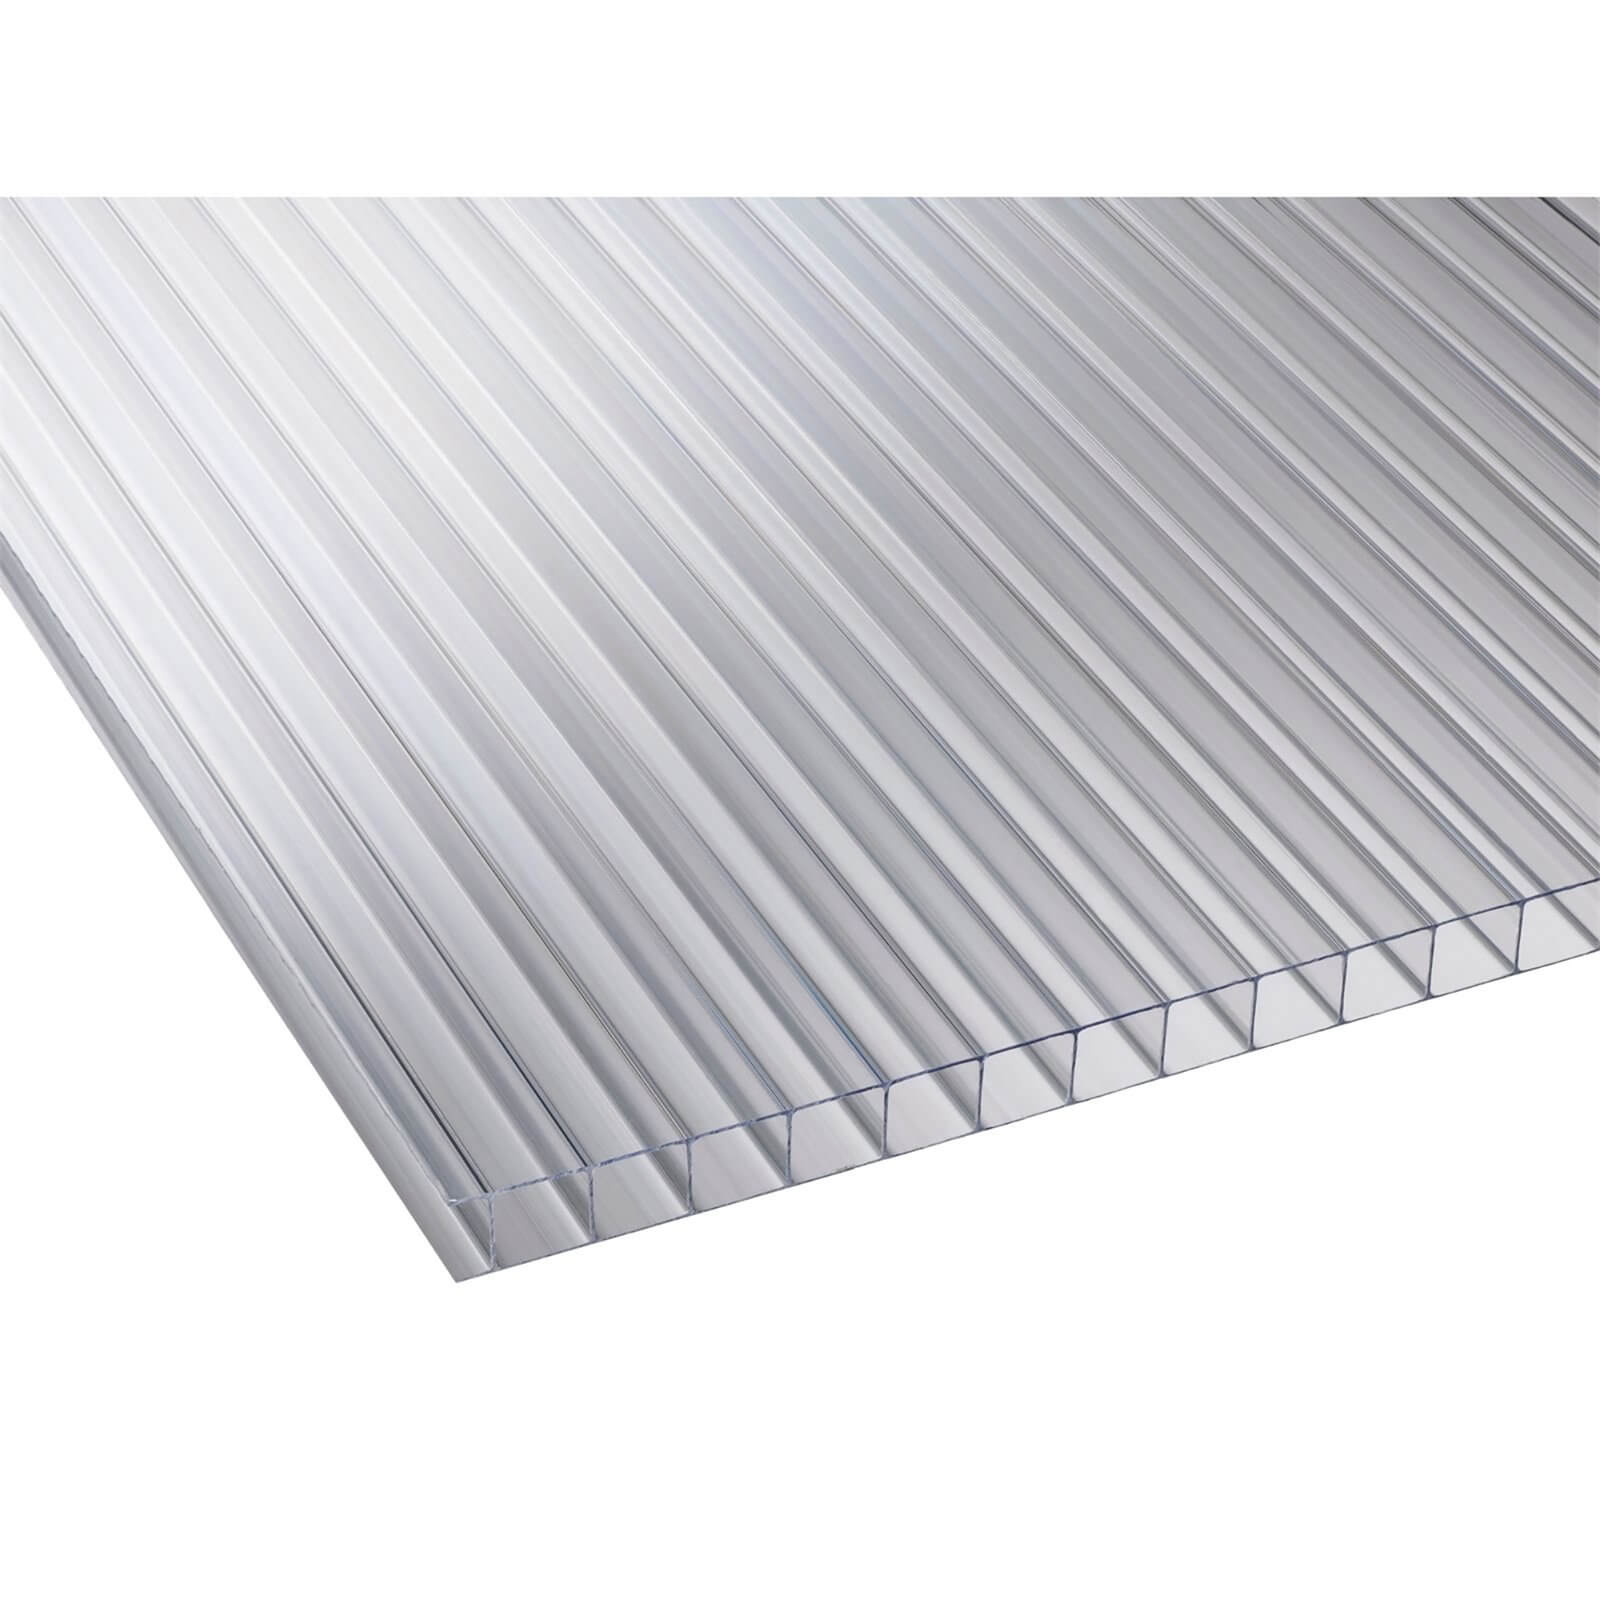 Photo of Corotherm Glazing & Roofing Sheet 3000x700x10mm - 3 Pack